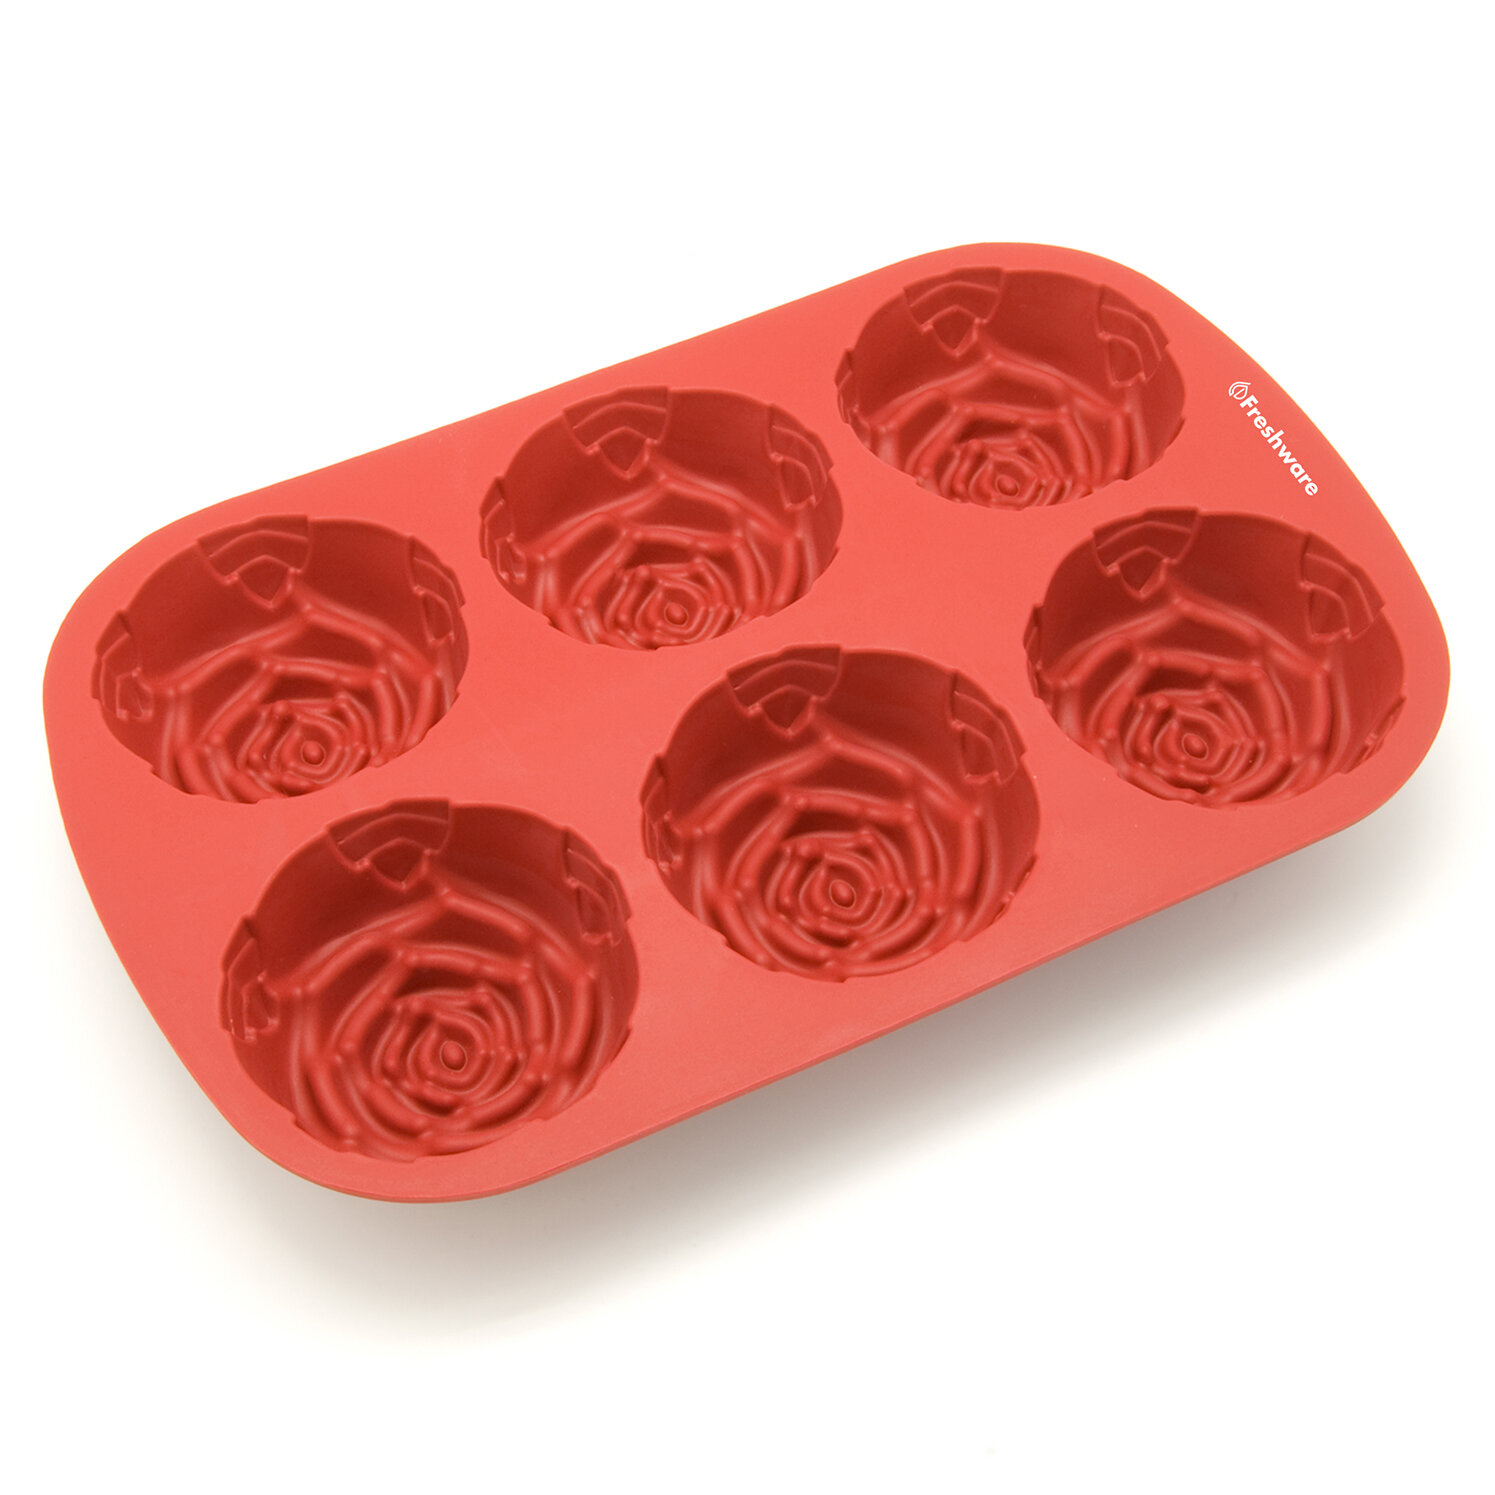 Create your own special desserts or homemade soaps with this 6-cavity silic...